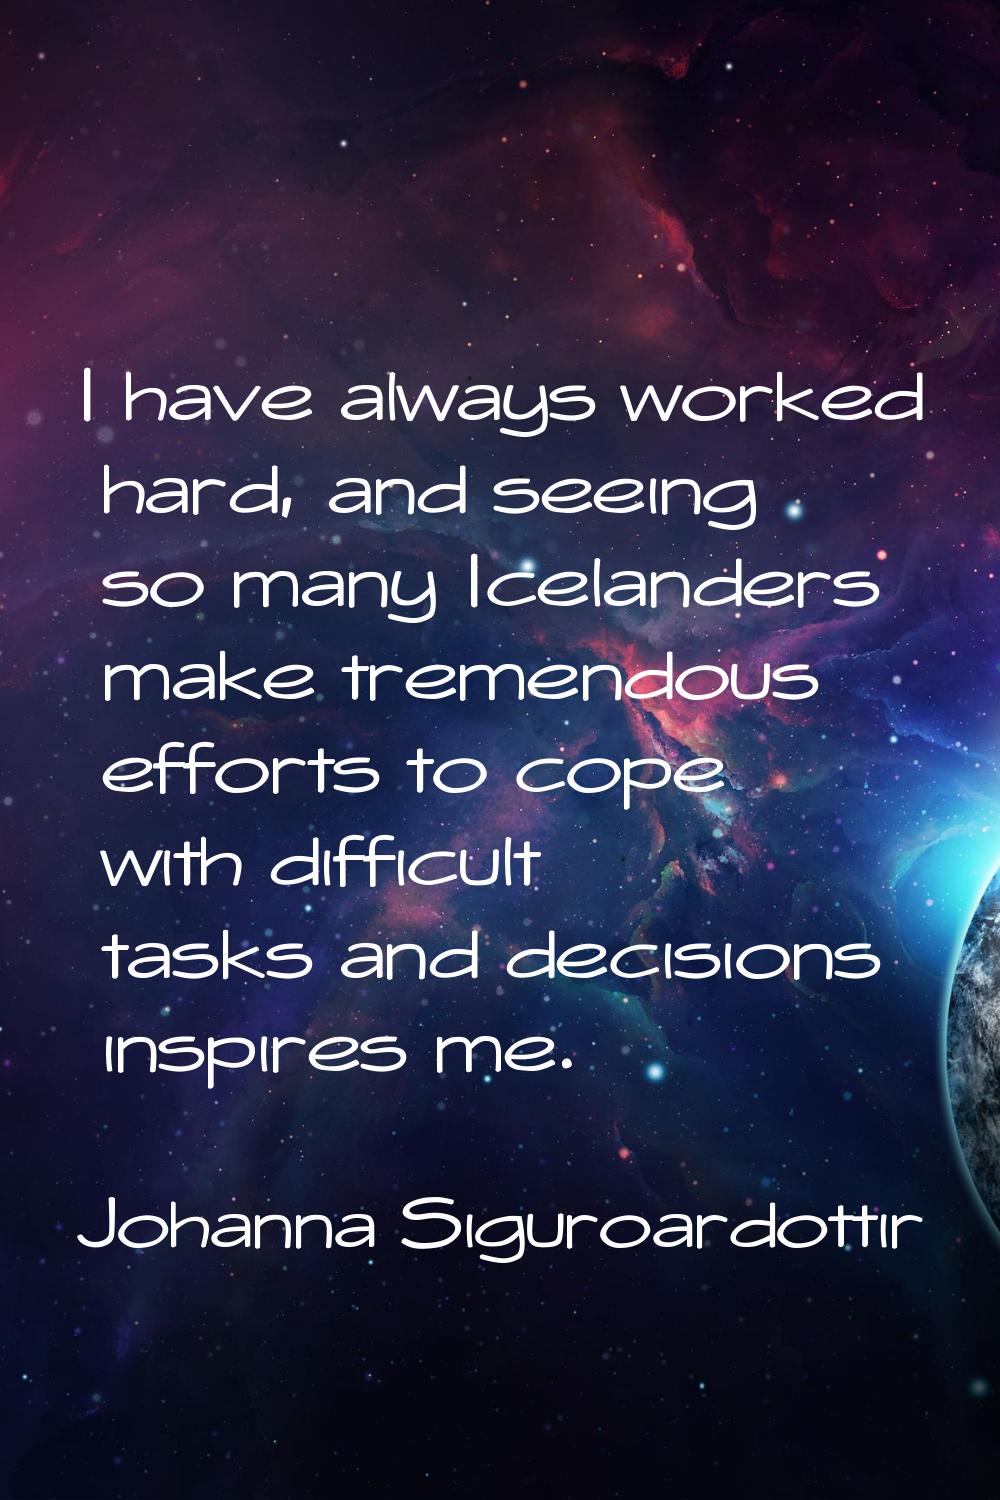 I have always worked hard, and seeing so many Icelanders make tremendous efforts to cope with diffi